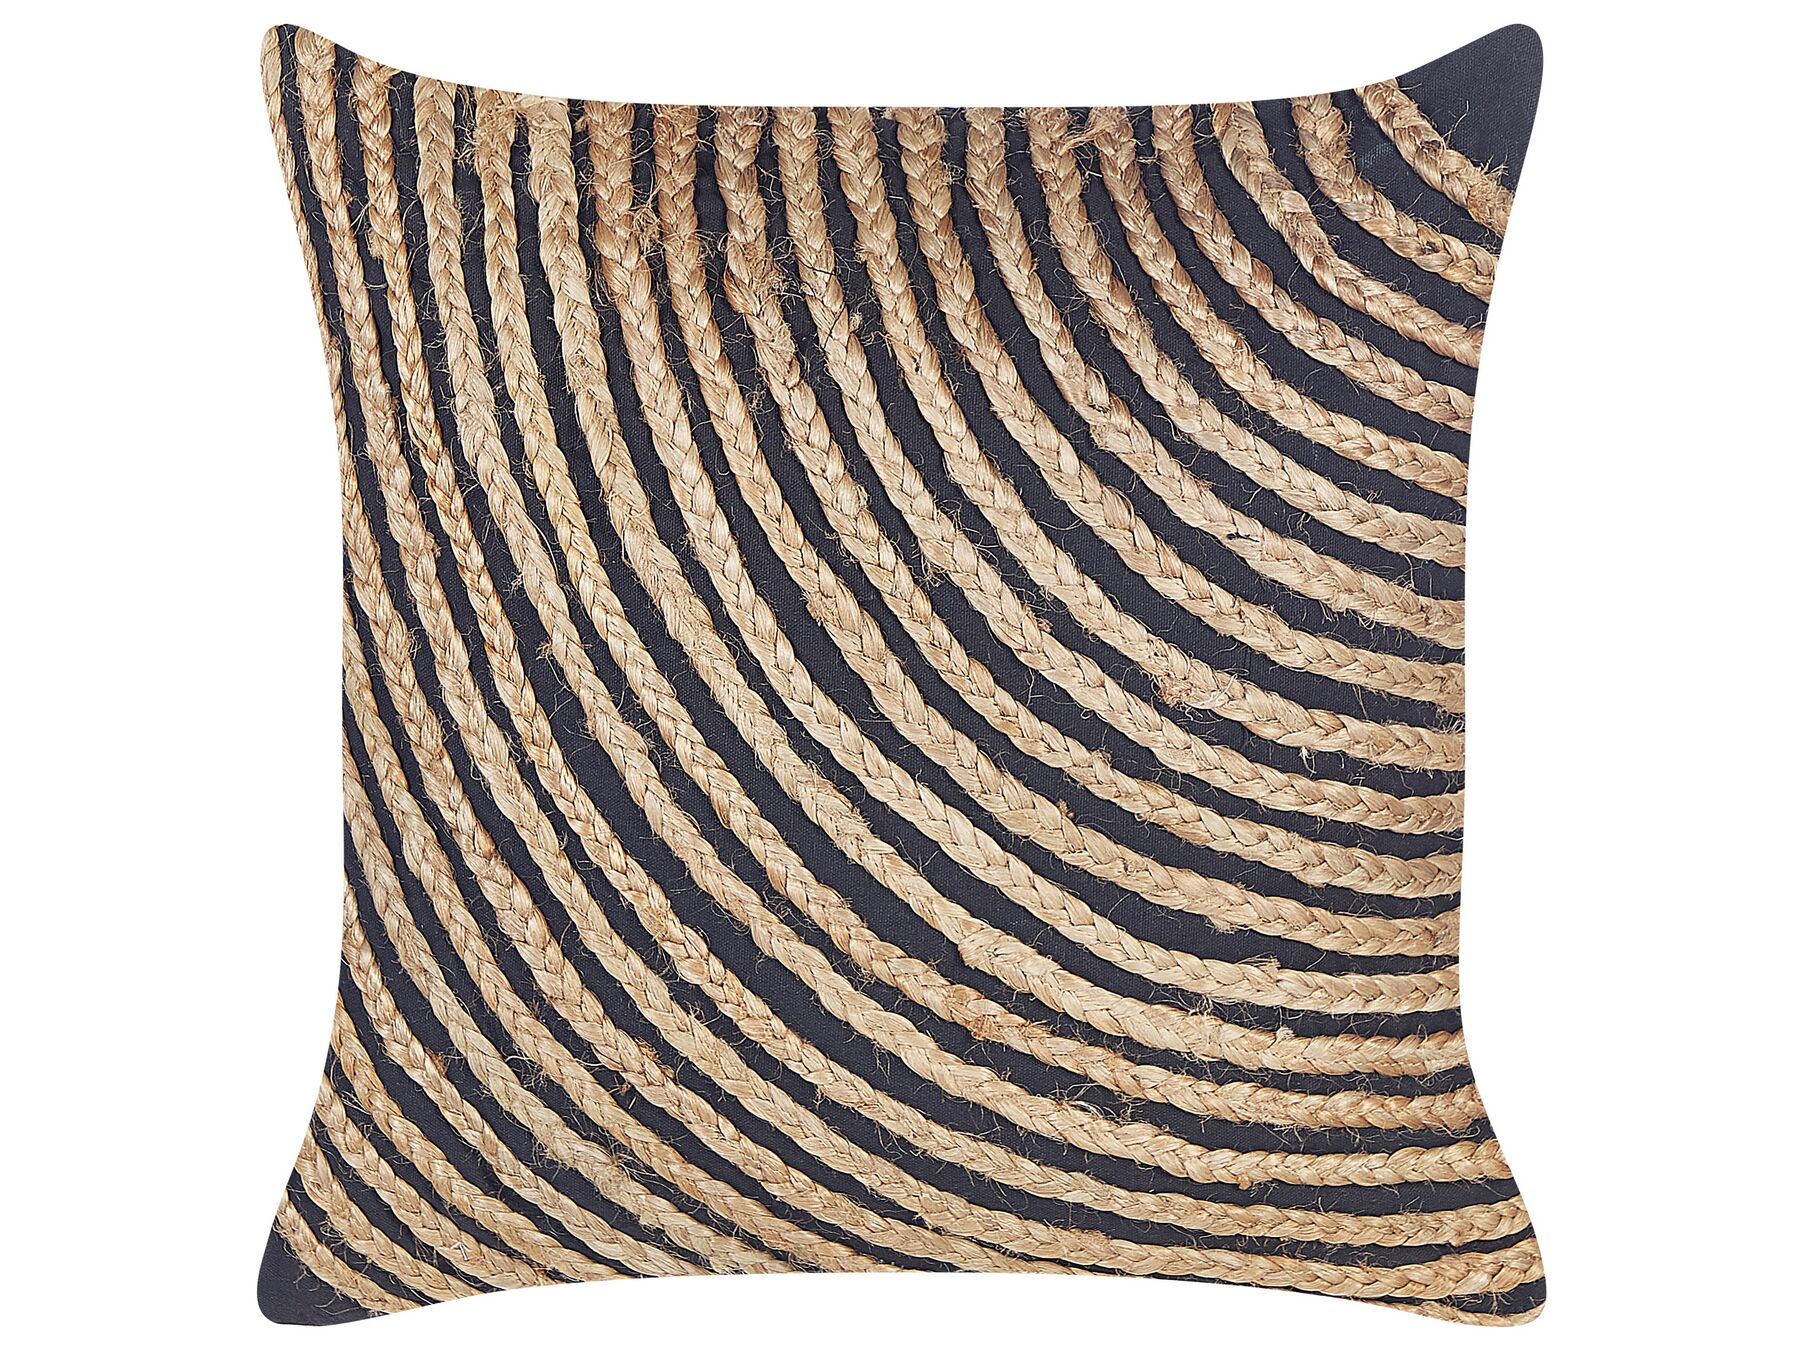 Cotton Cushion with Braided Jute 45 x 45 cm Beige and Black BERGENIA_843209